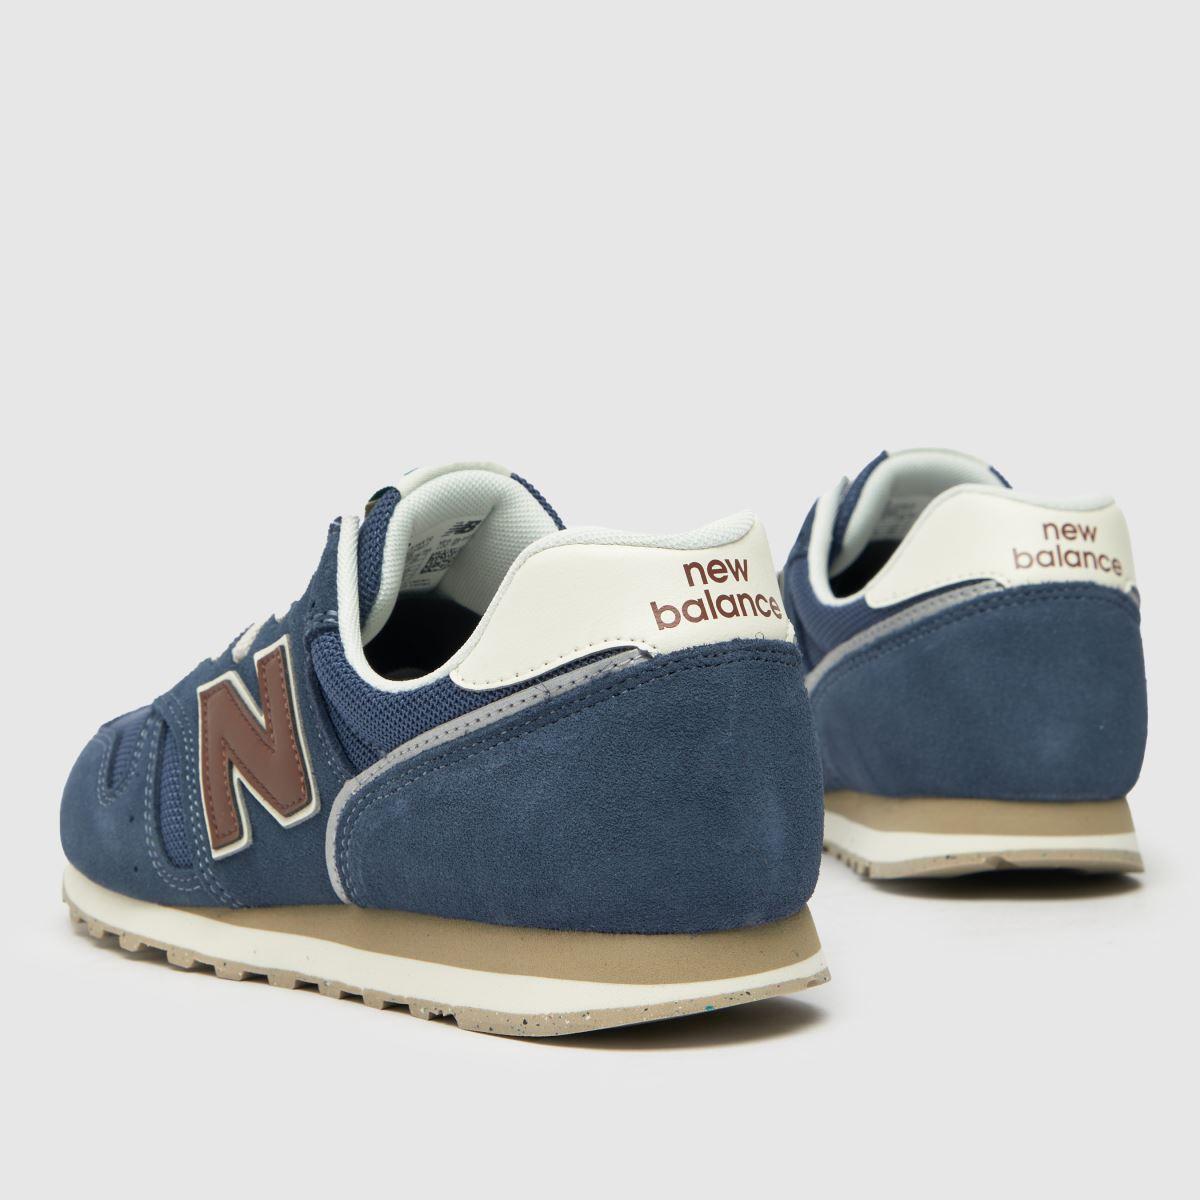 New Balance 373 Trainers Brown & Navy in for Men Lyst UK